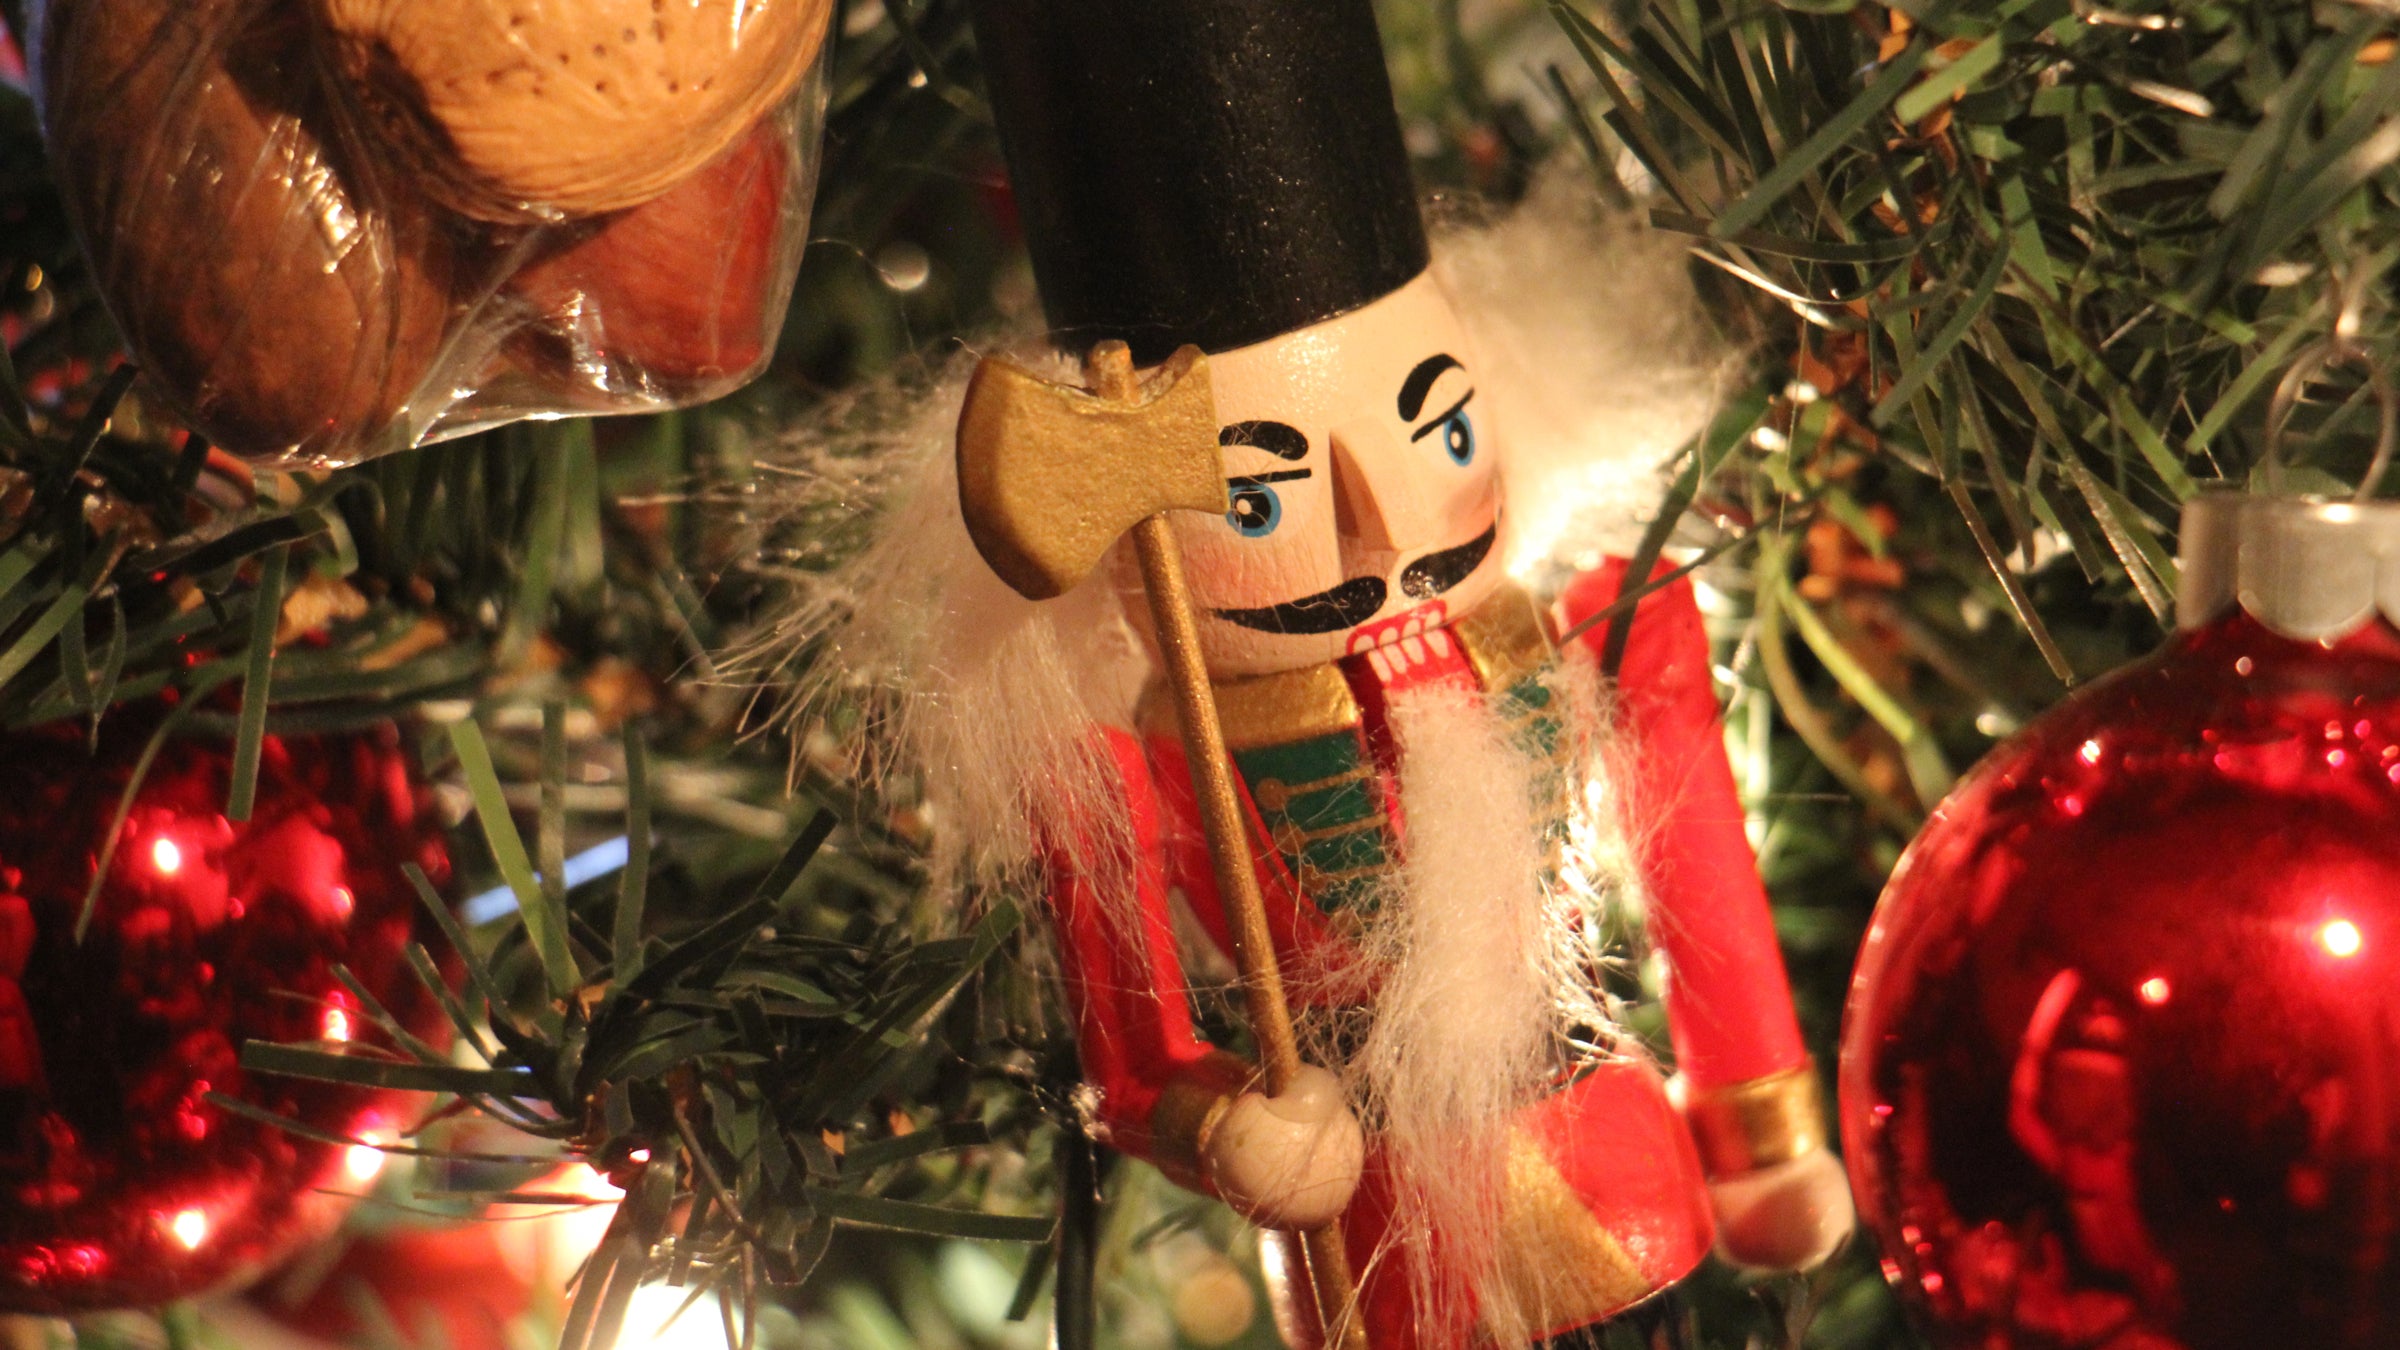 A nutcracker ornament hangs from the Christmas tree at the David Wilson house. (Emma Lee/WHYY)